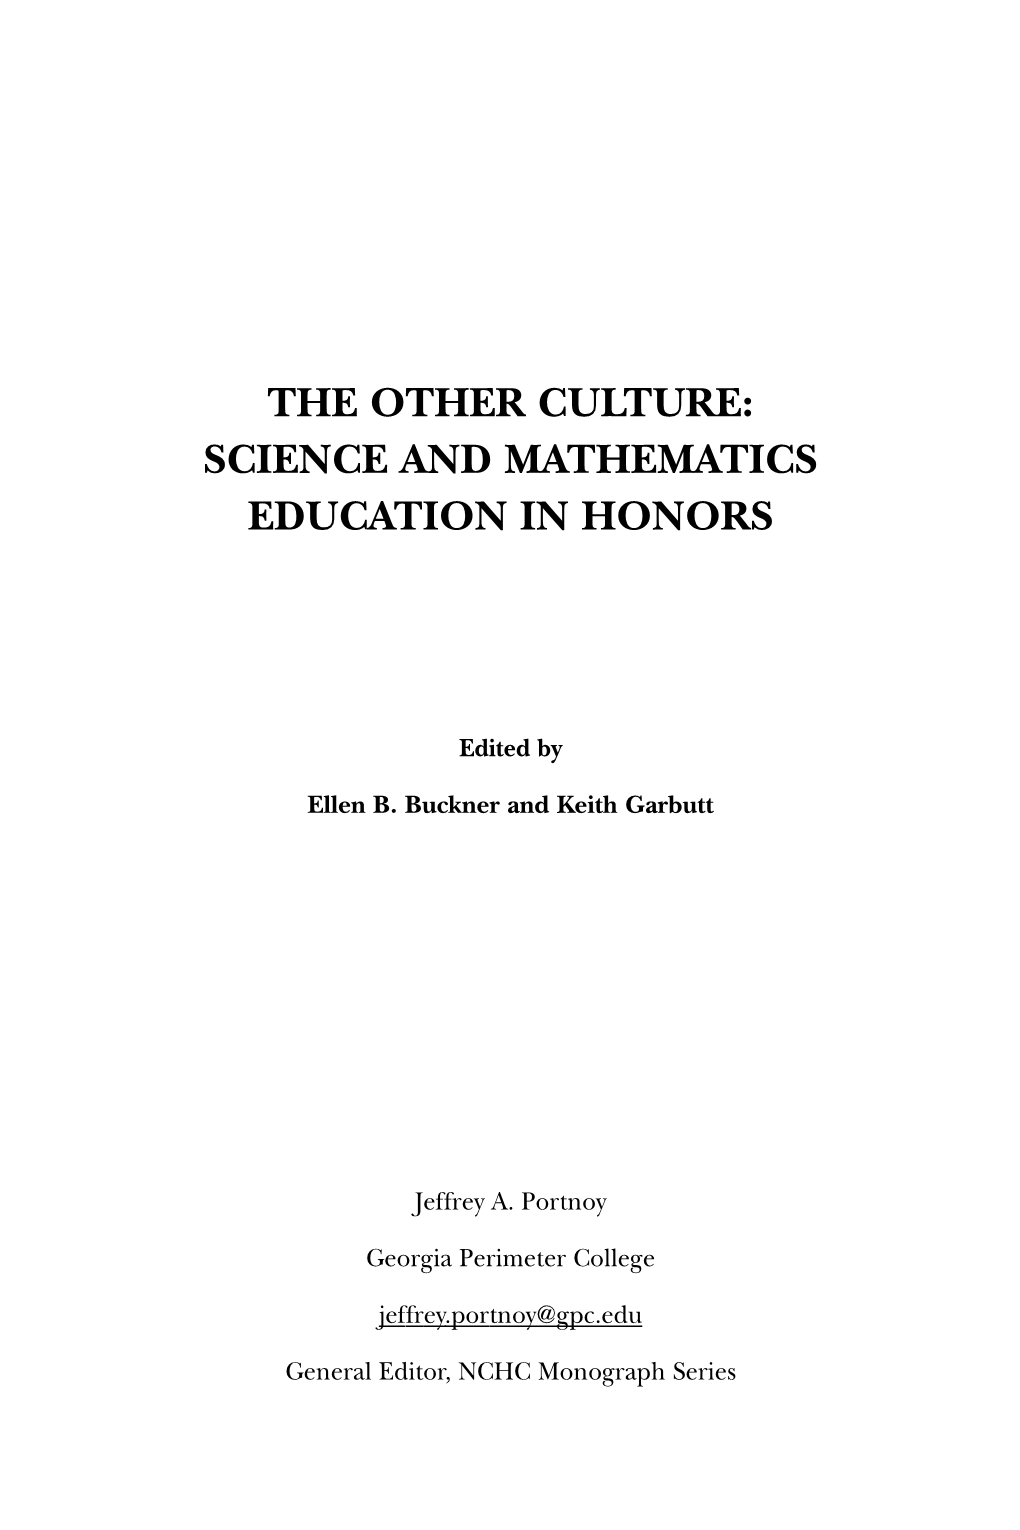 Science and Mathematics Education in Honors